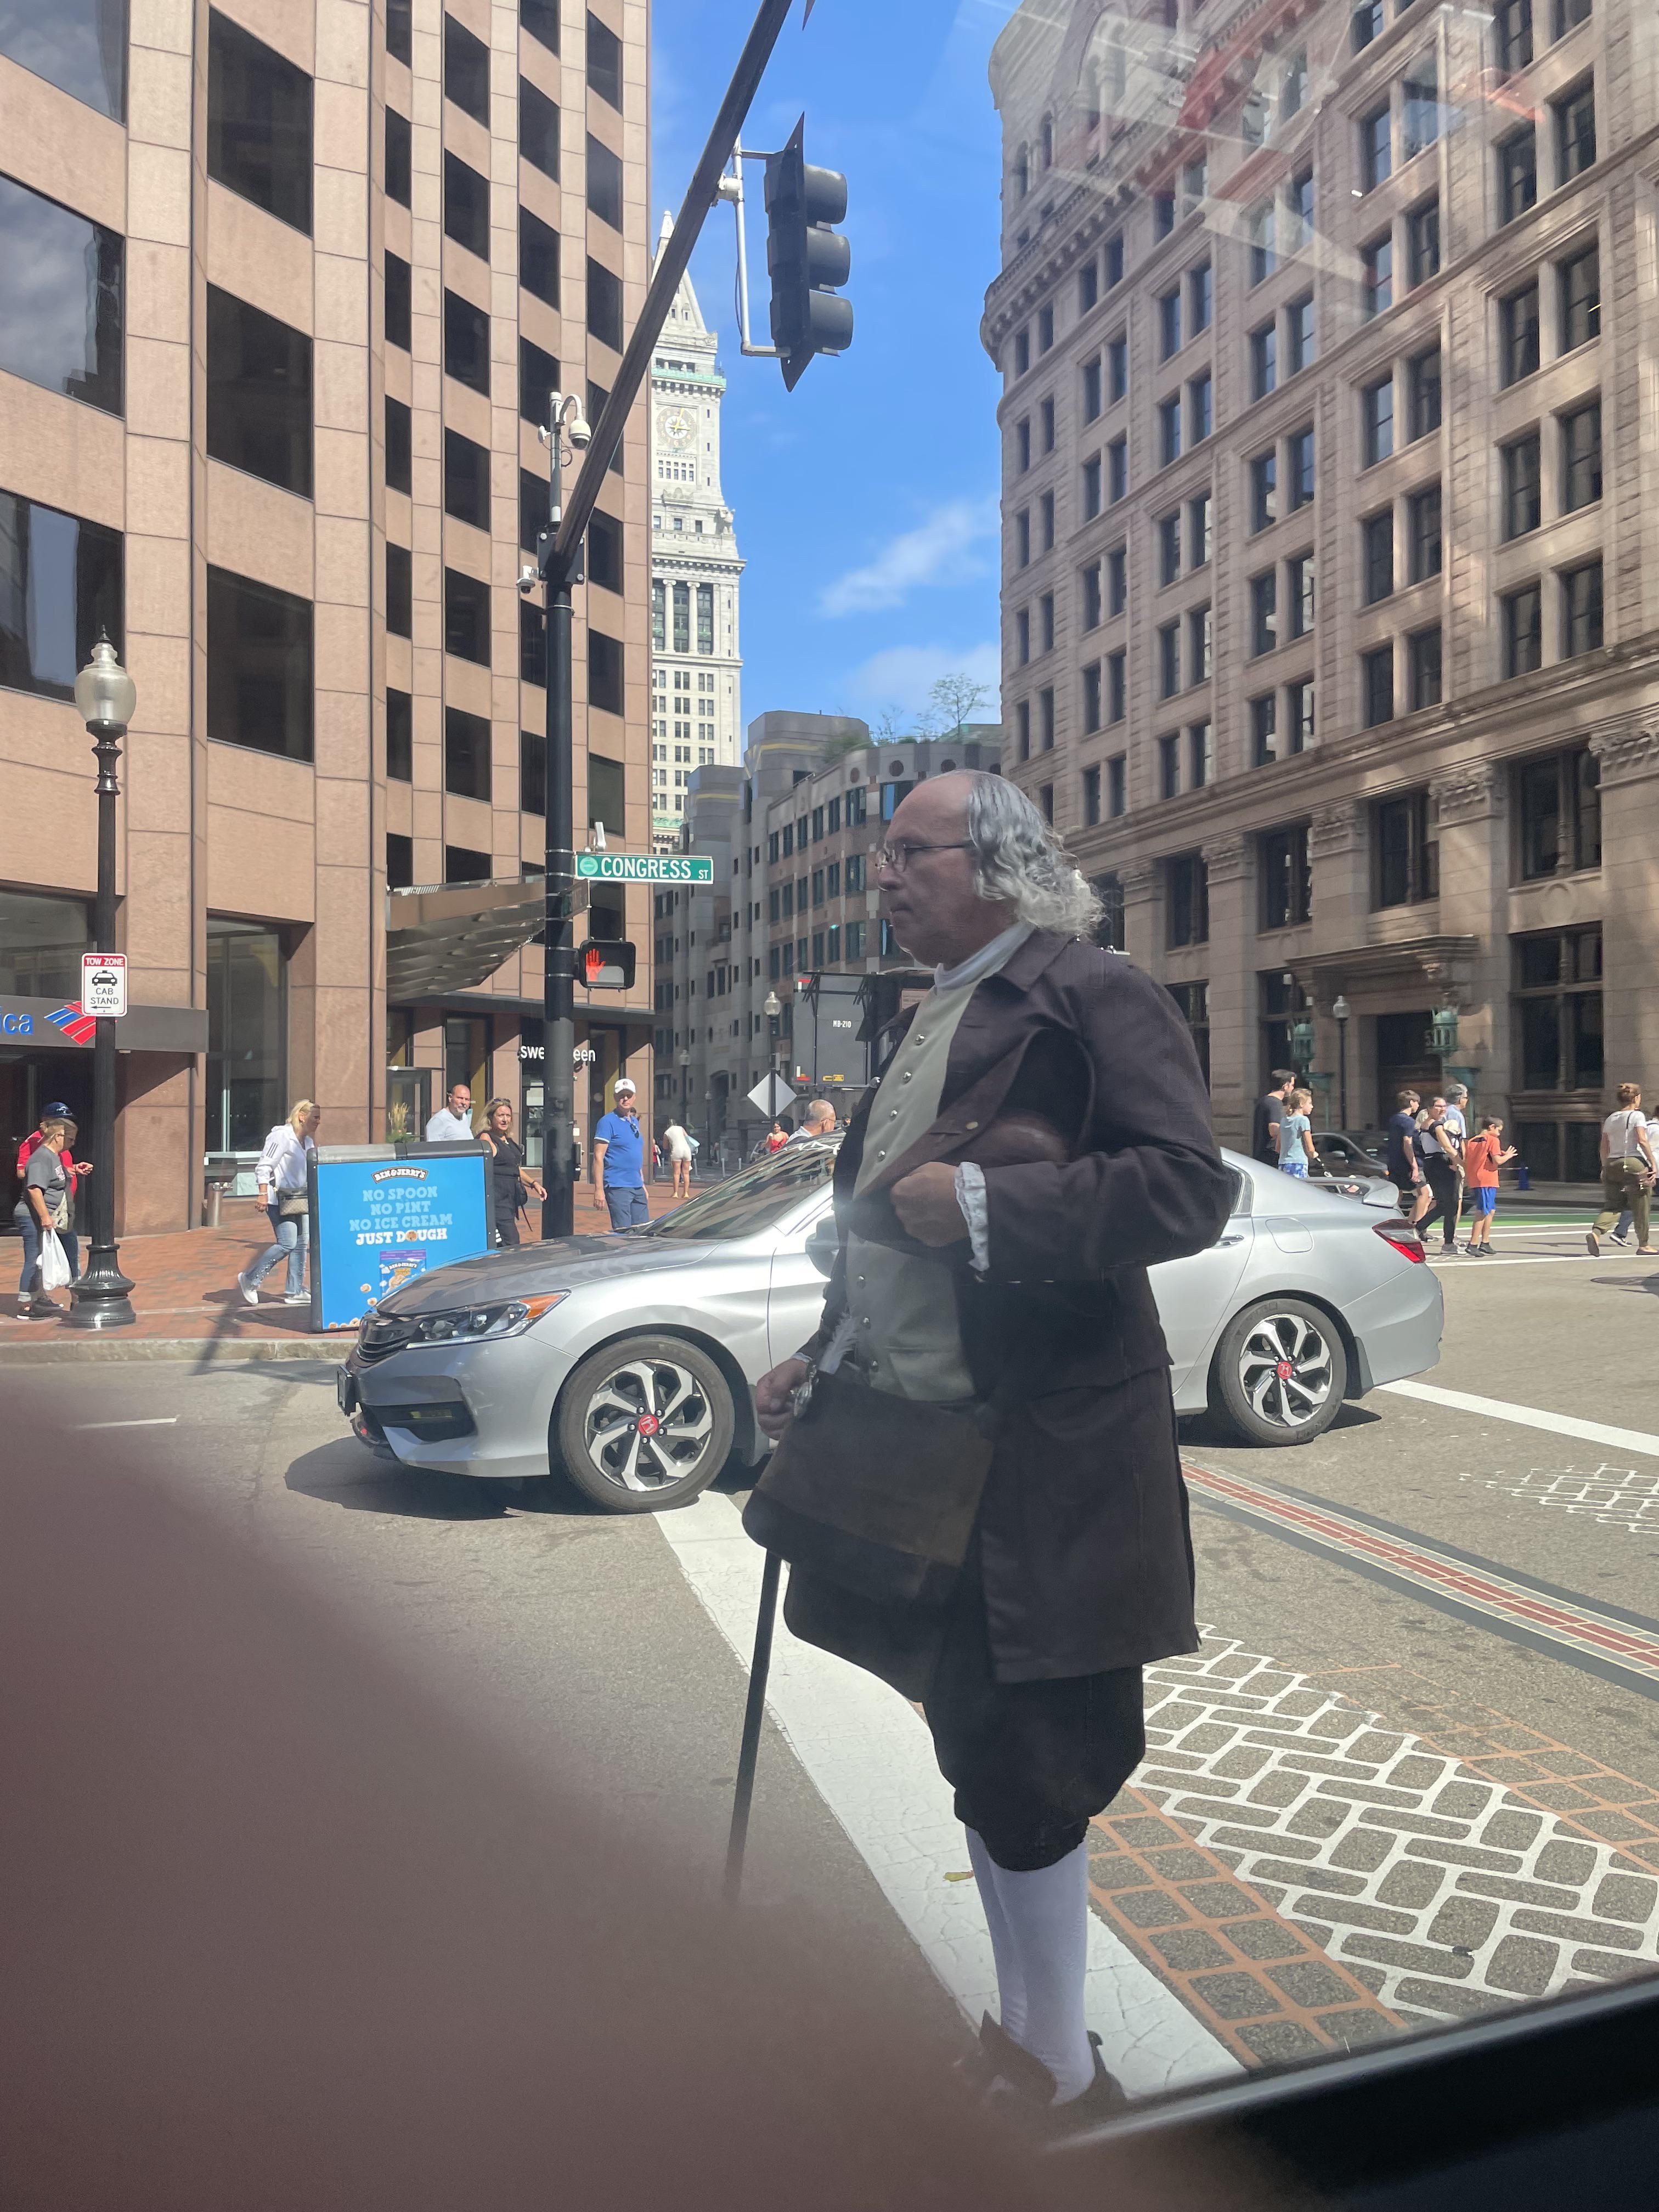 Just Ben Franklin crossing the road. Totally normal Boston day.